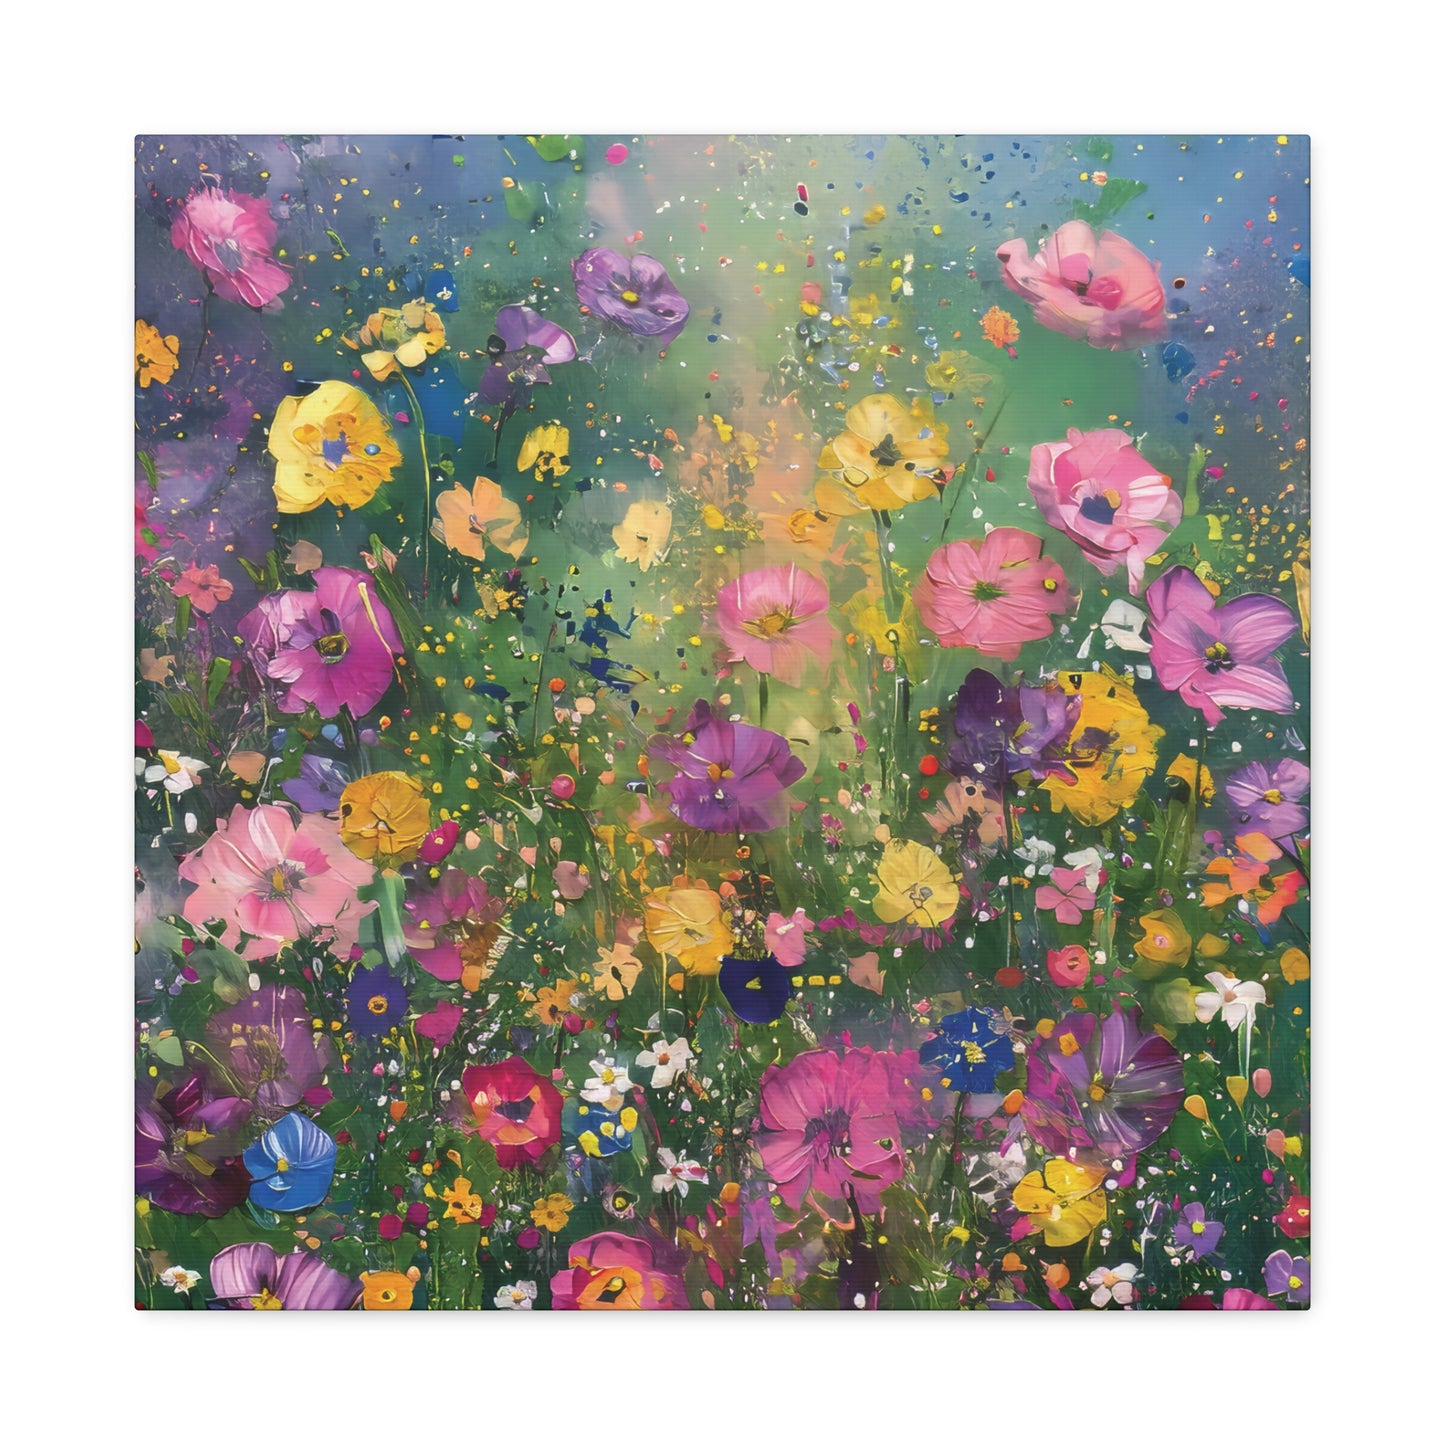 Field of Bright Spring Flowers Print on Canvas Gallery Wraps  - 5 Sizes